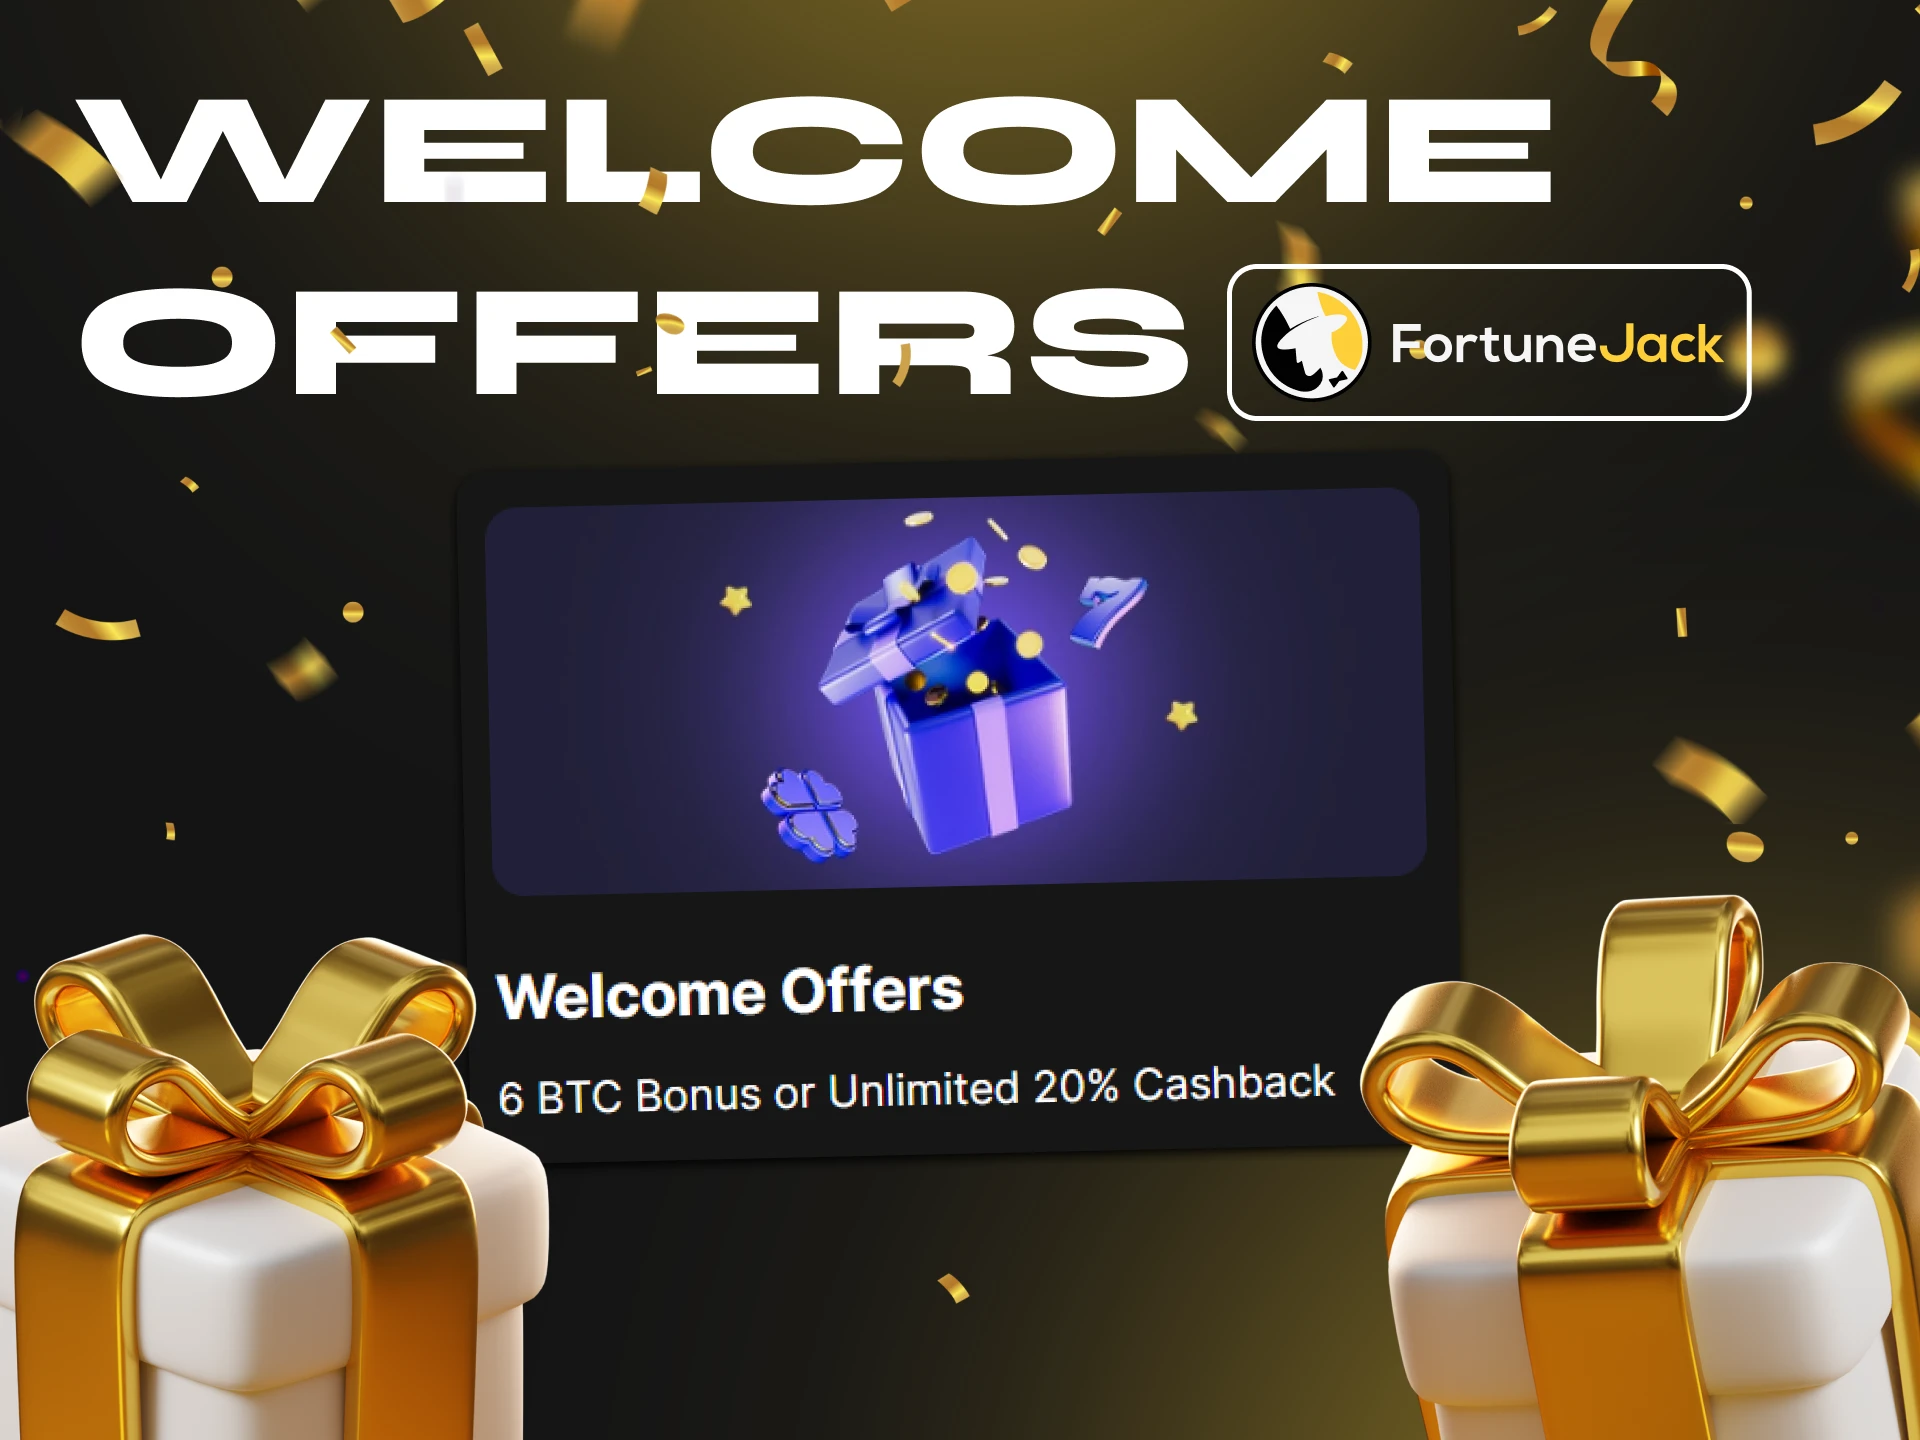 FortuneJack Casino offers its users lucrative welcome bonuses for several deposits.